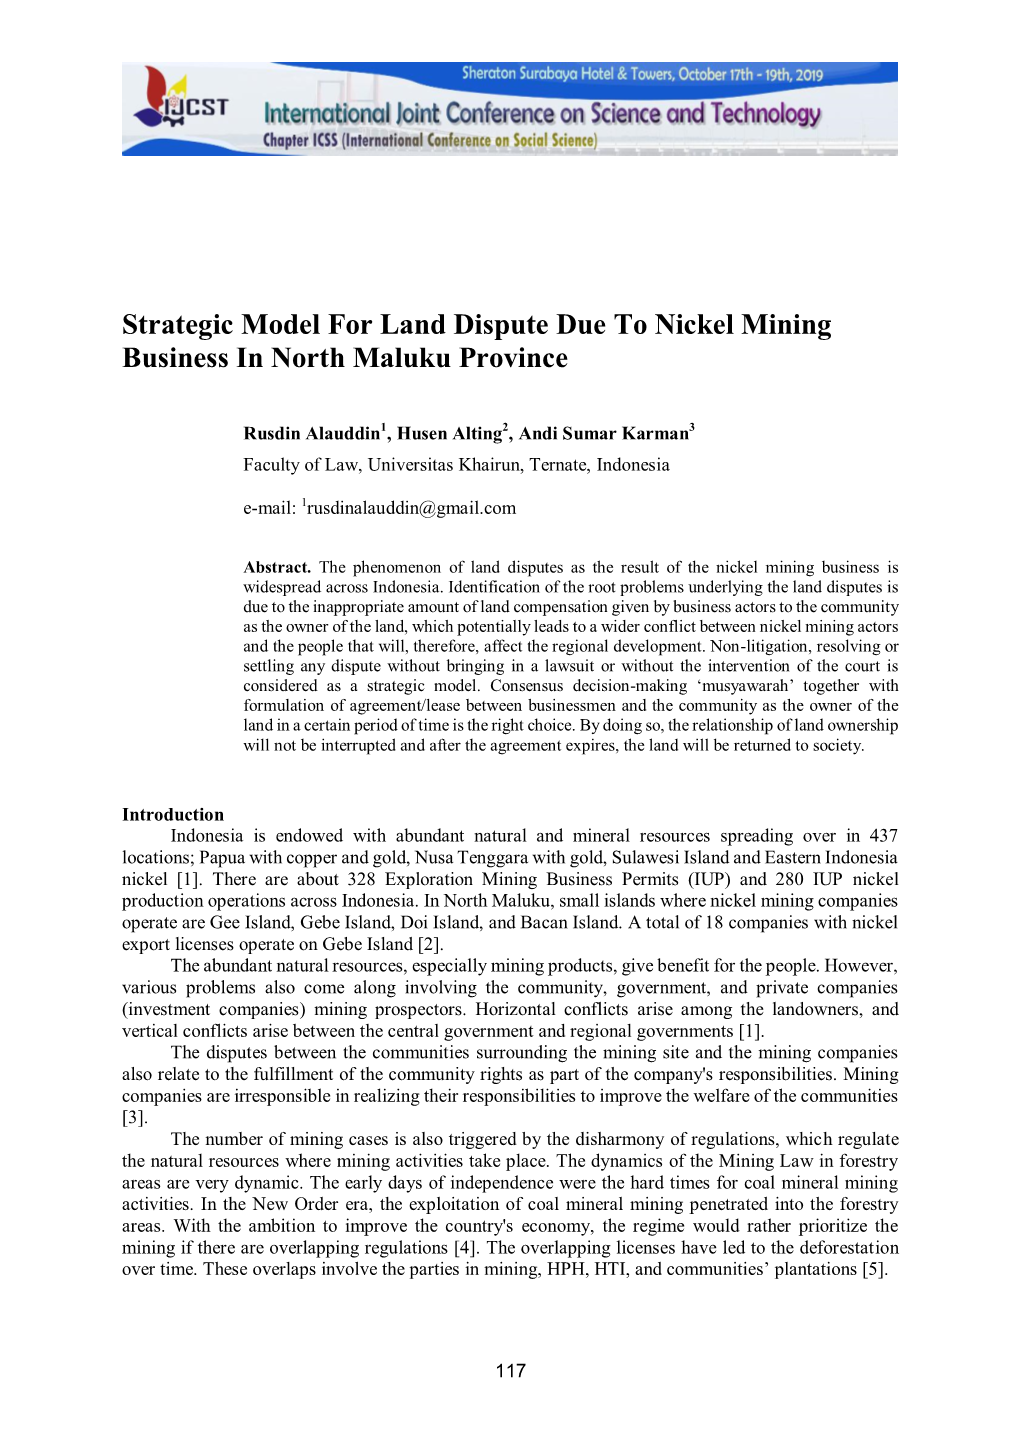 Strategic Model for Land Dispute Due to Nickel Mining Business in North Maluku Province